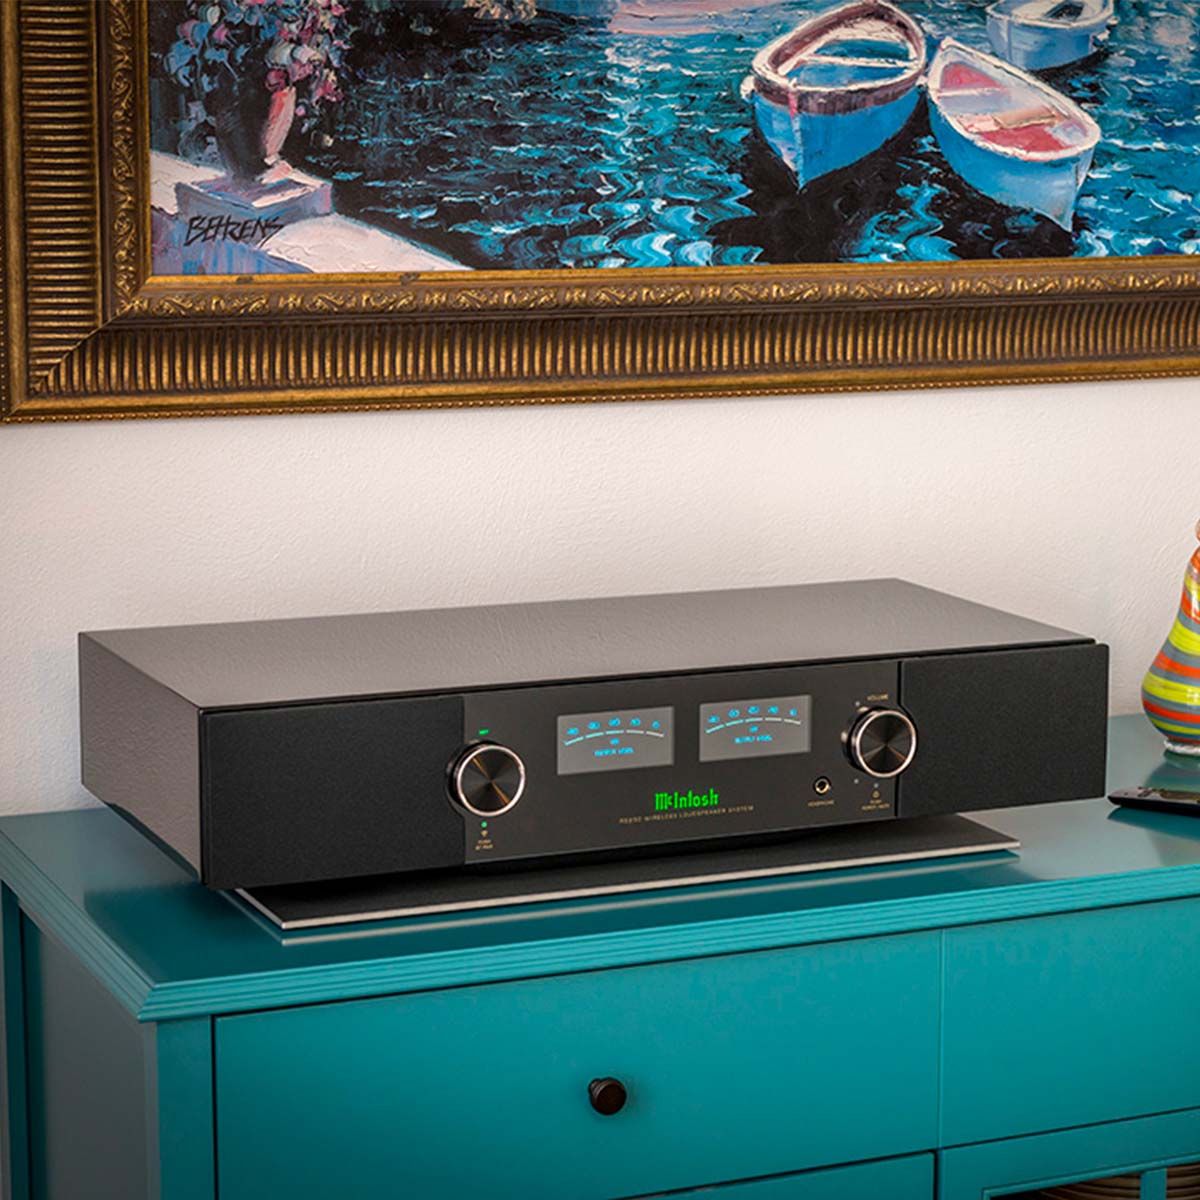 McIntosh RS250 Wireless Speaker, on top of turquoise media console